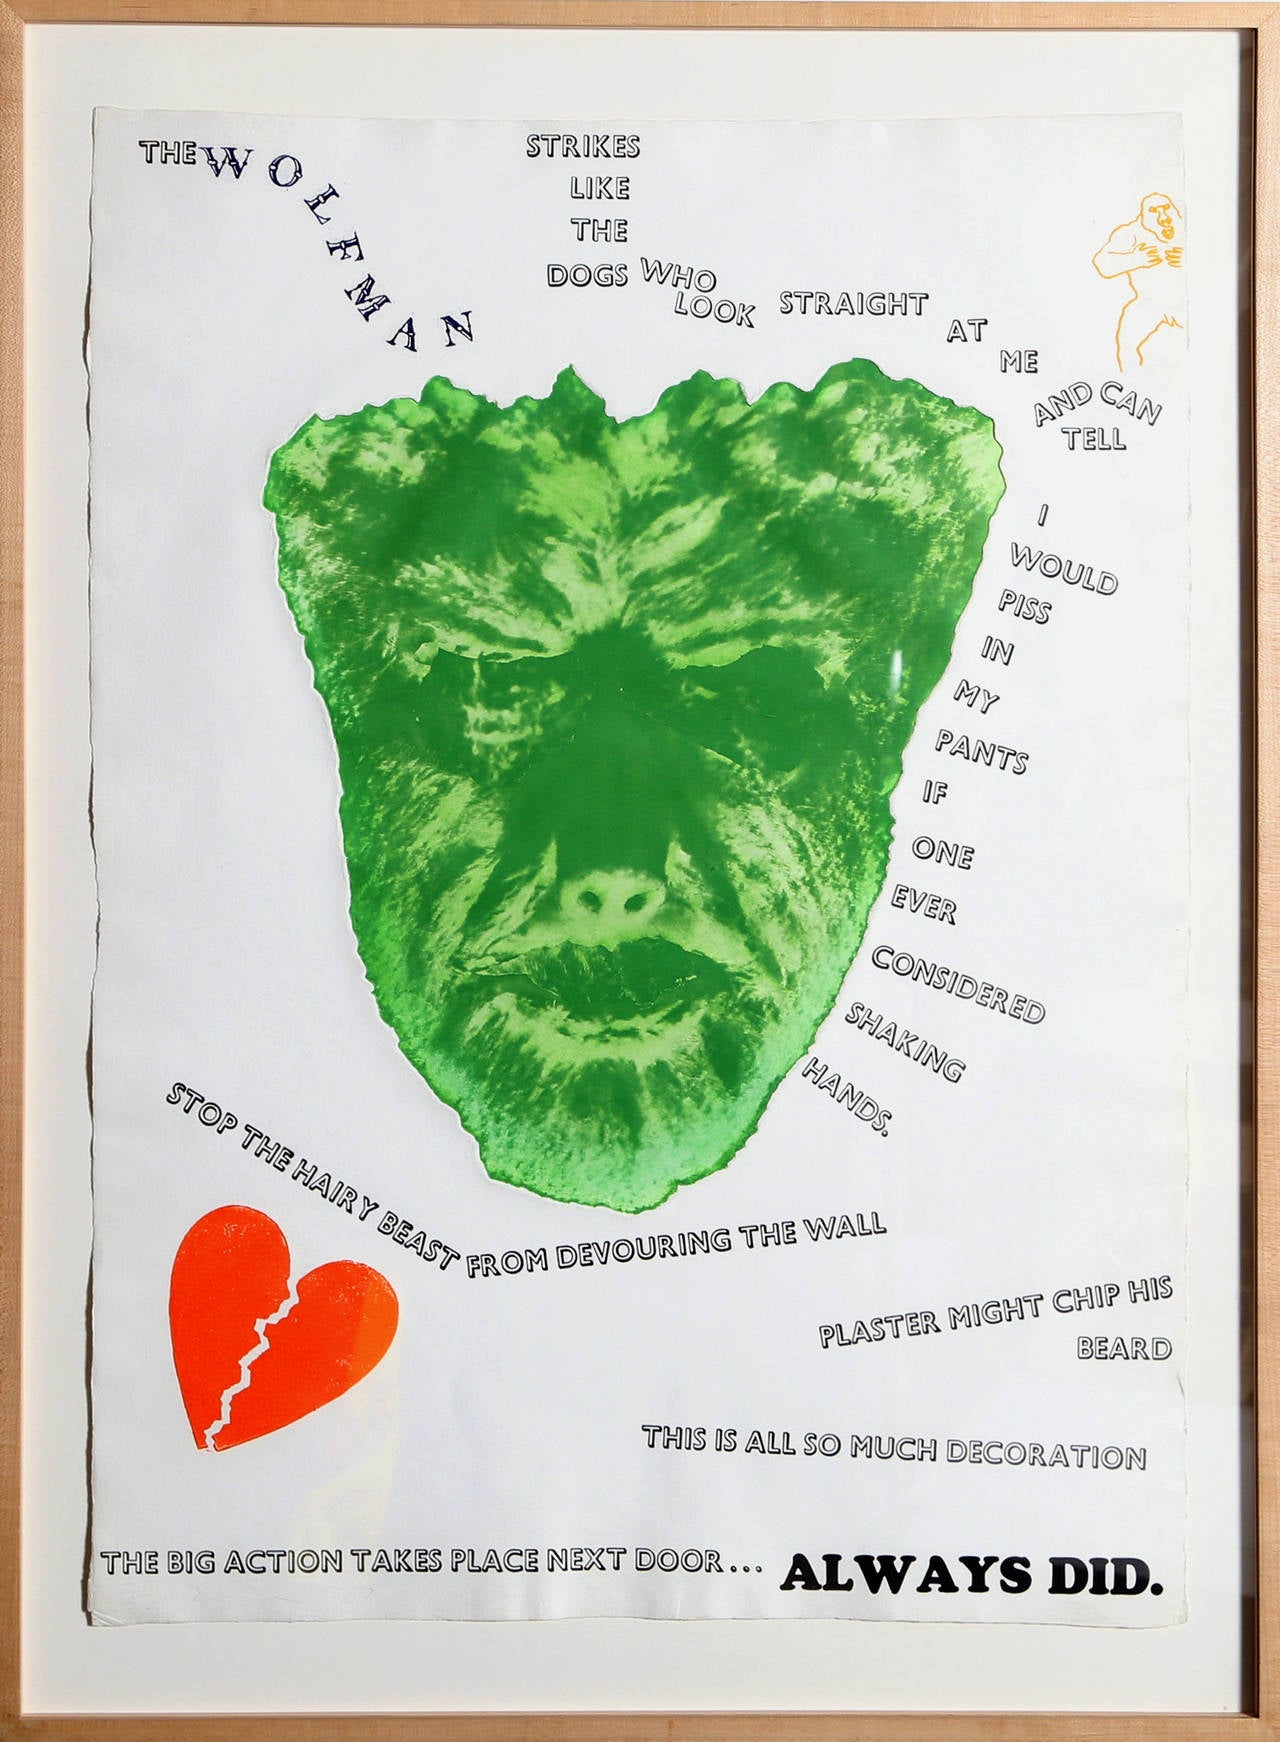 Wolfman, Pop Art etching by Jim Dine 1967